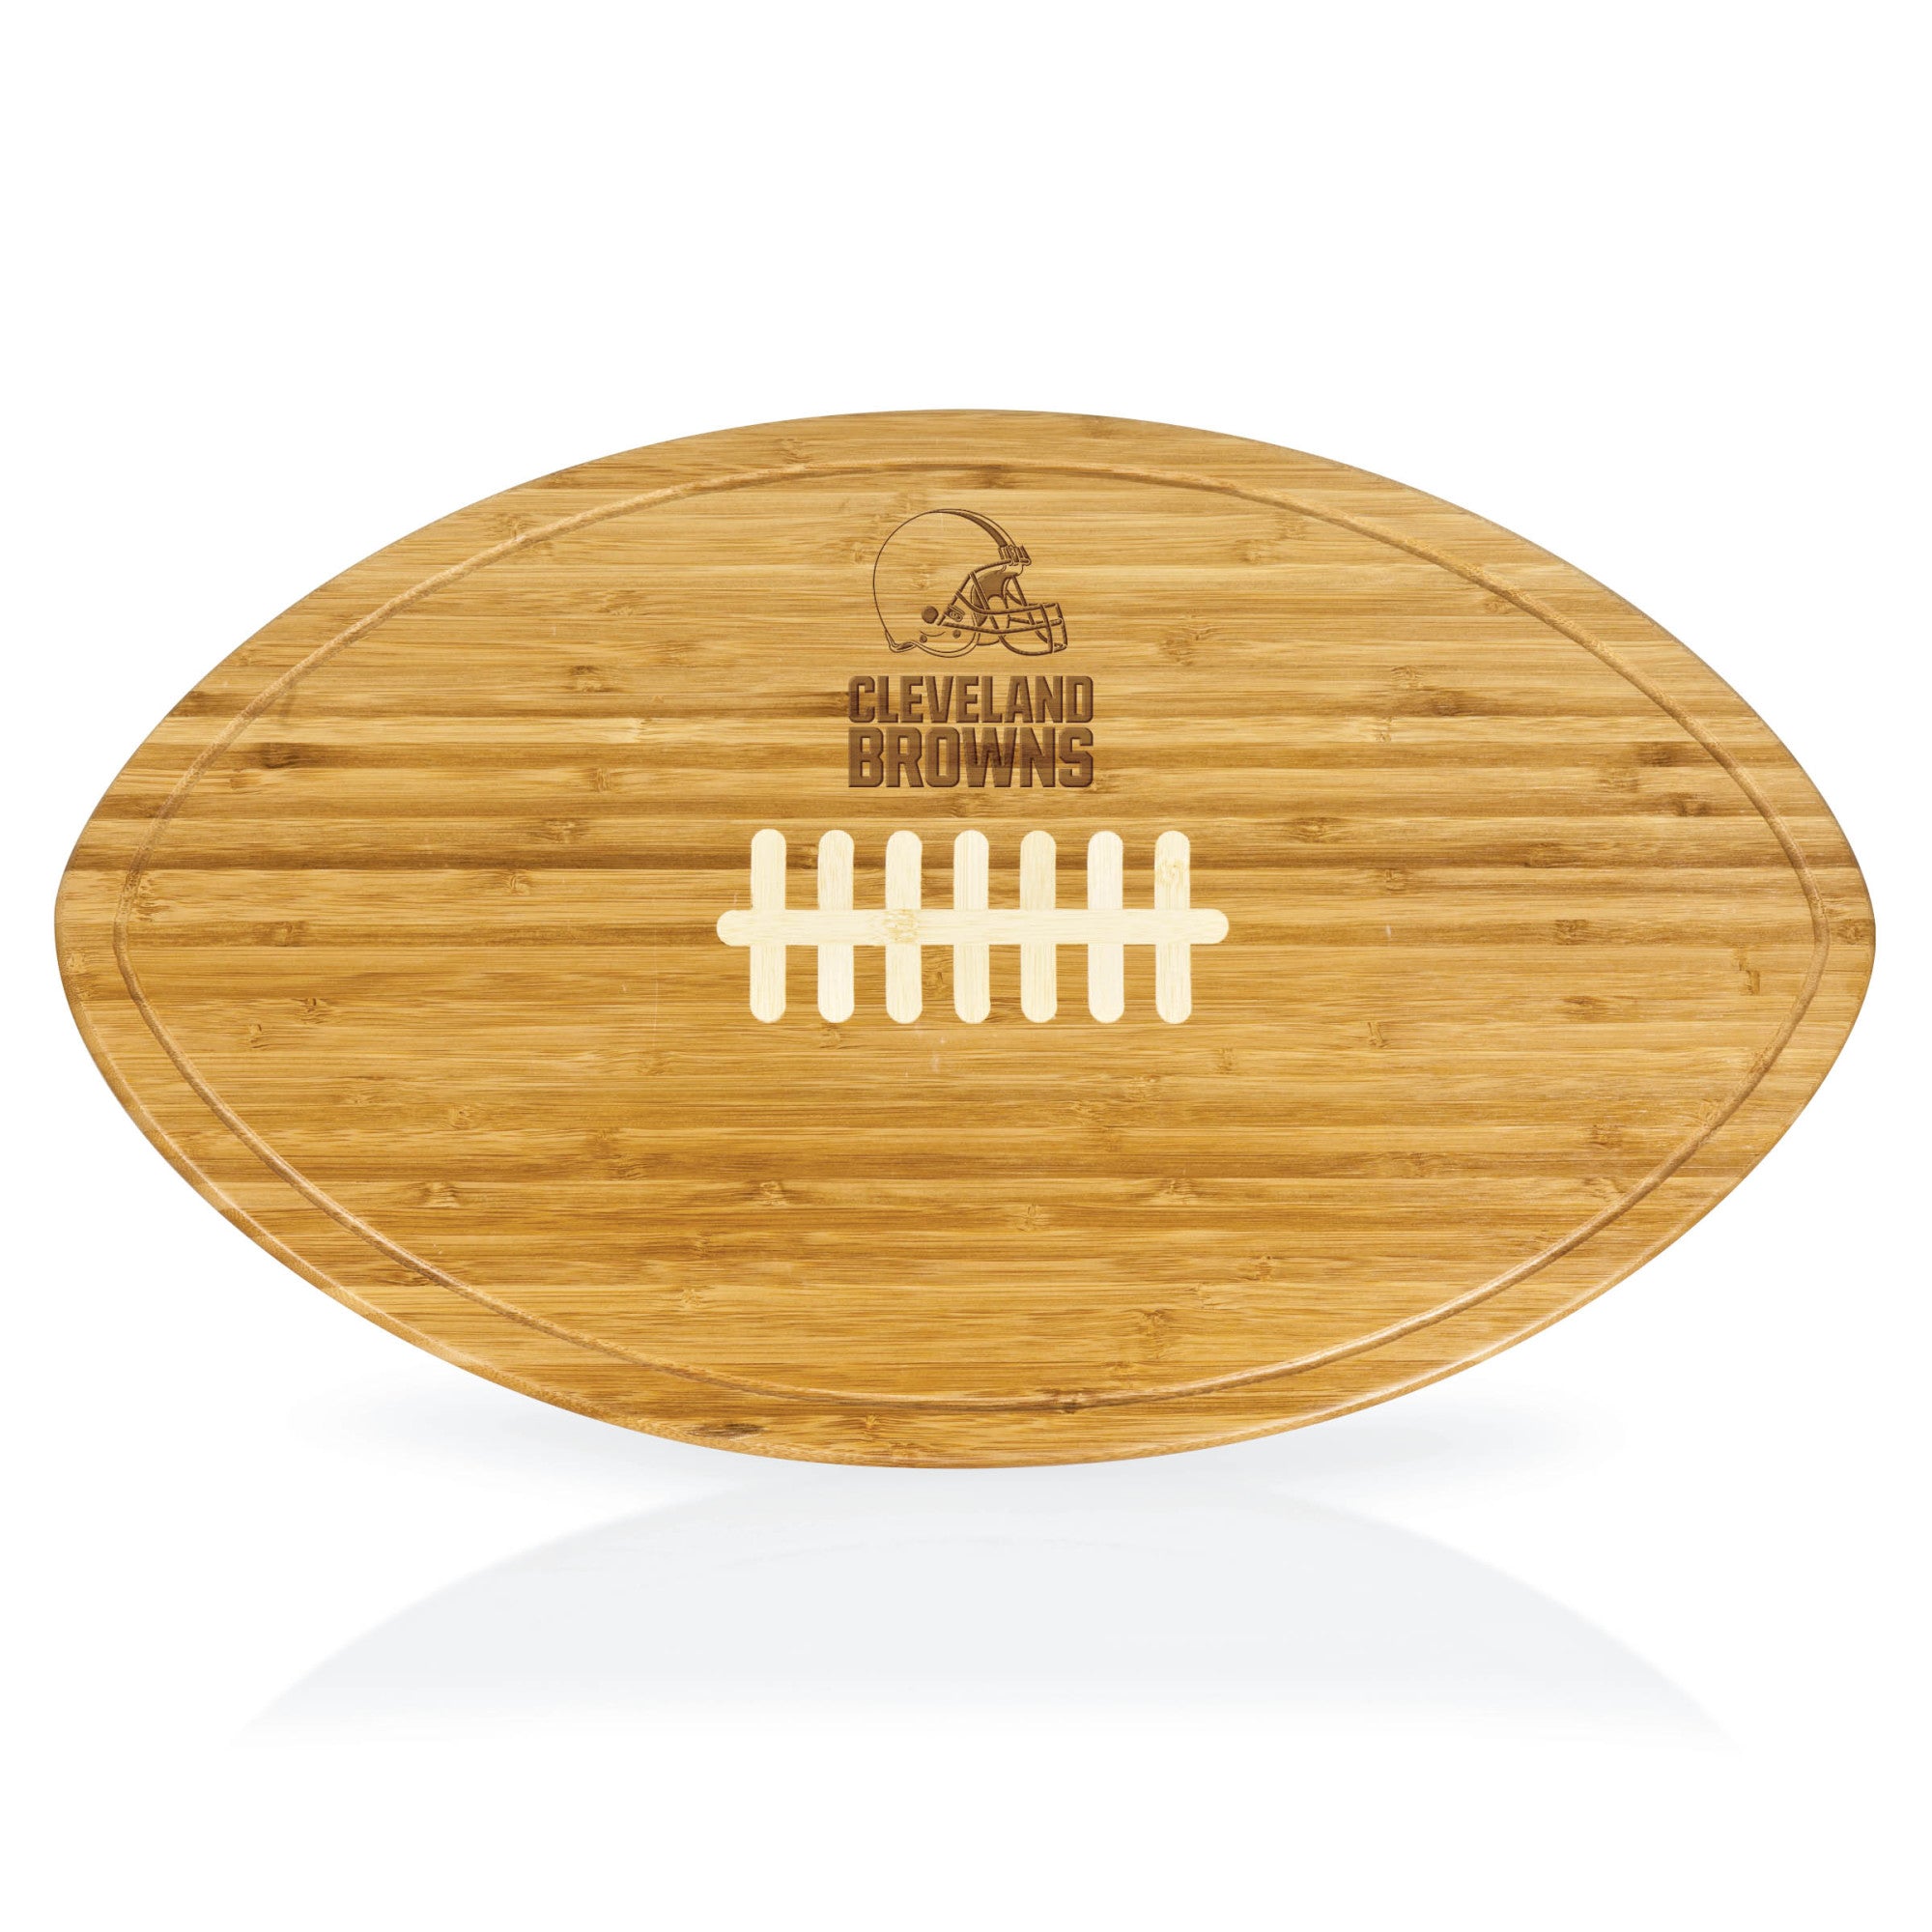 Cleveland Browns - Kickoff Football Cutting Board & Serving Tray